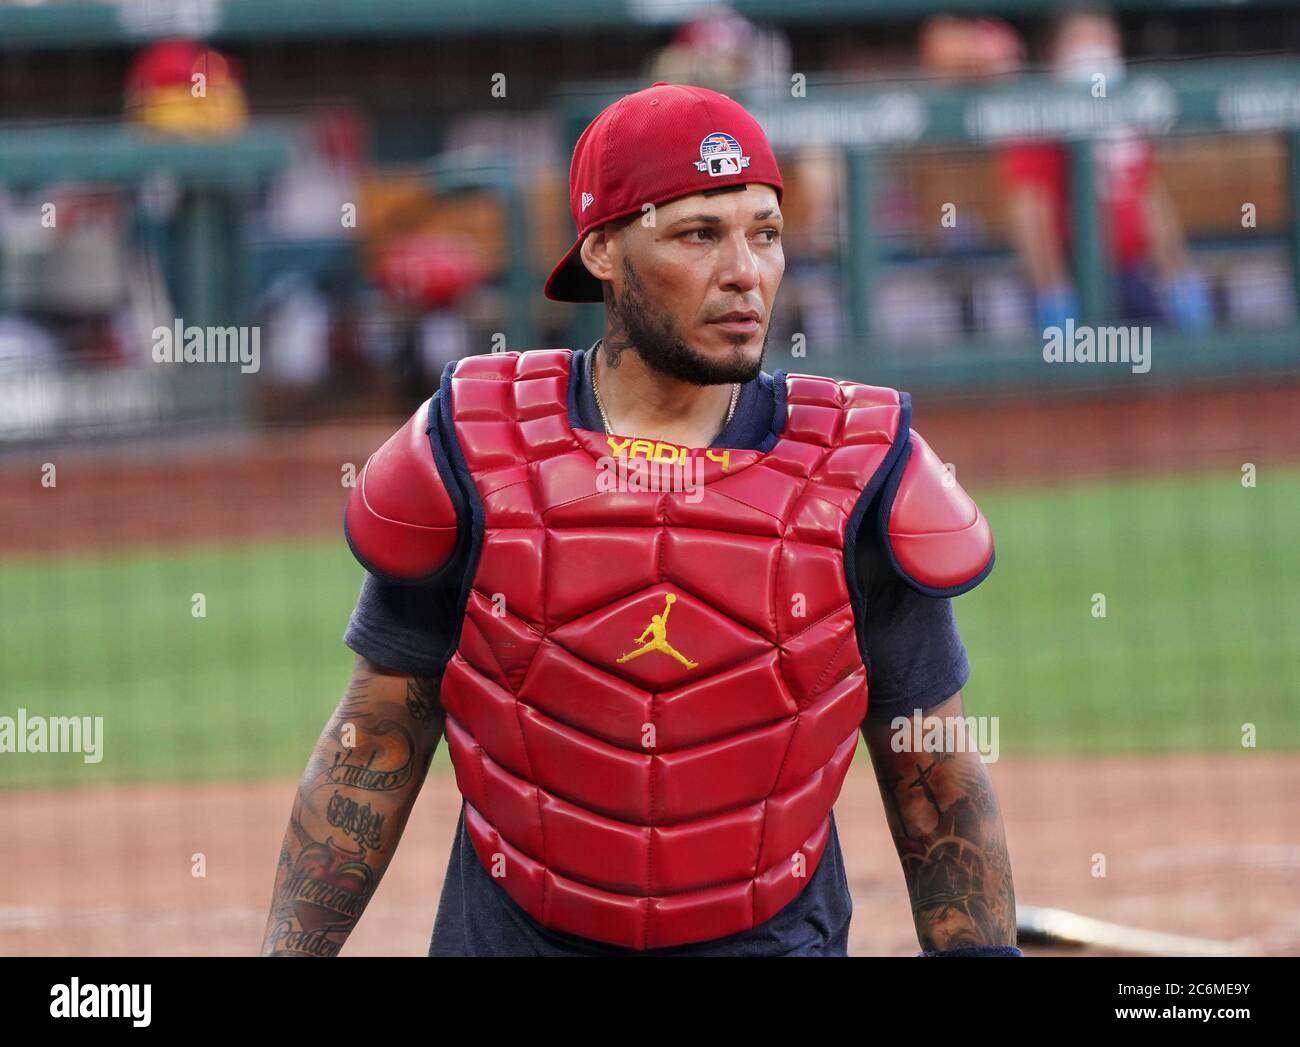 Yadier Molina of the St. Louis Cardinals and the National League and  Fotografía de noticias - Getty Images